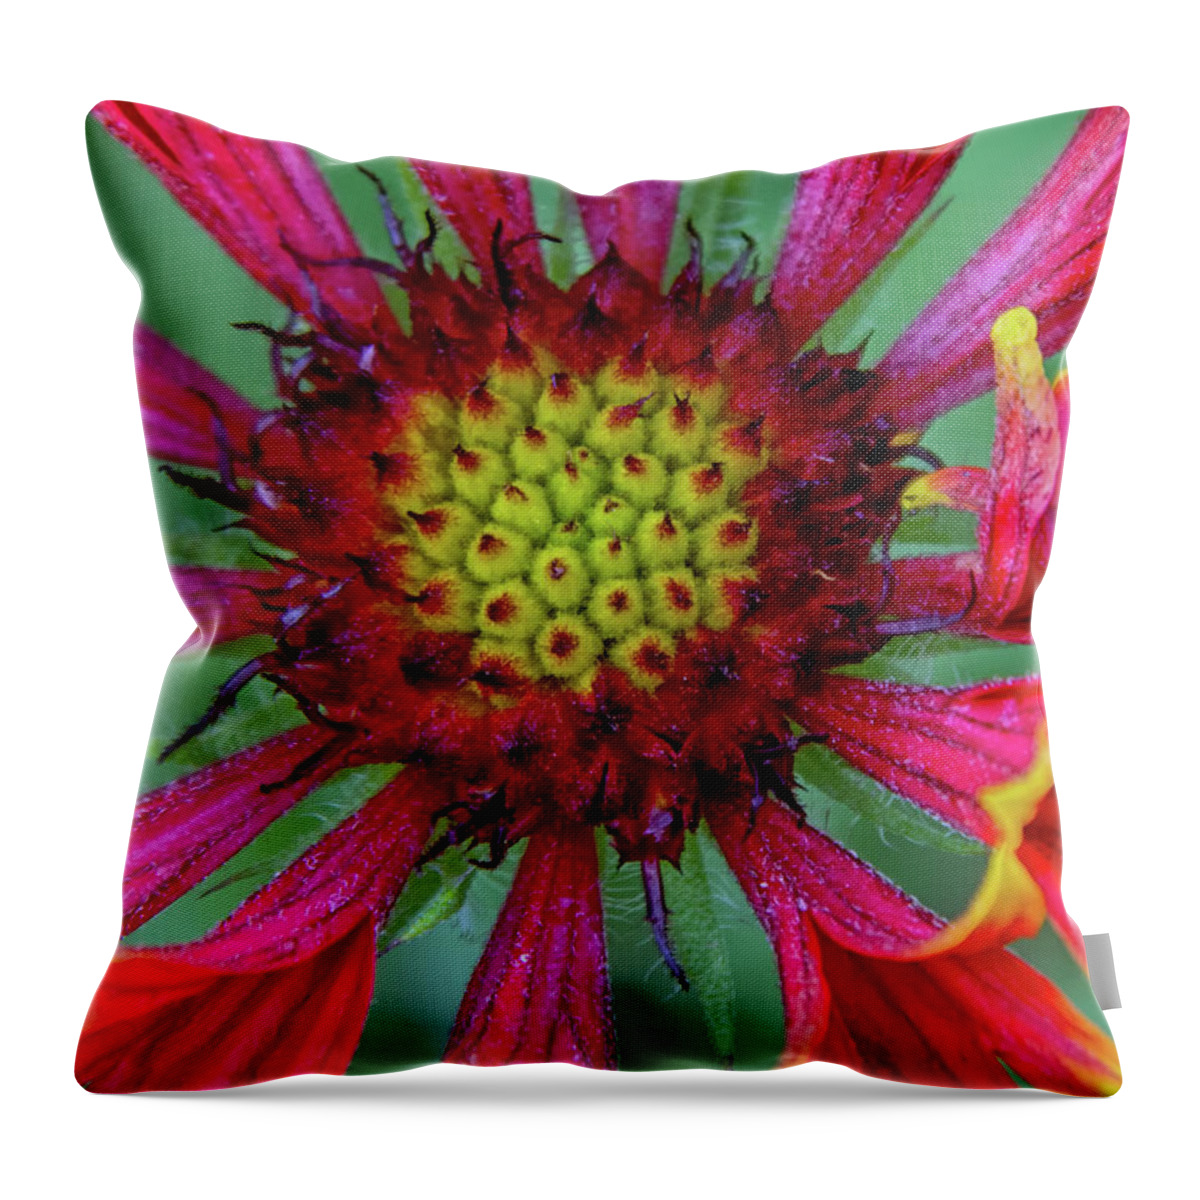 Flower Throw Pillow featuring the photograph Flower by Tam Ryan